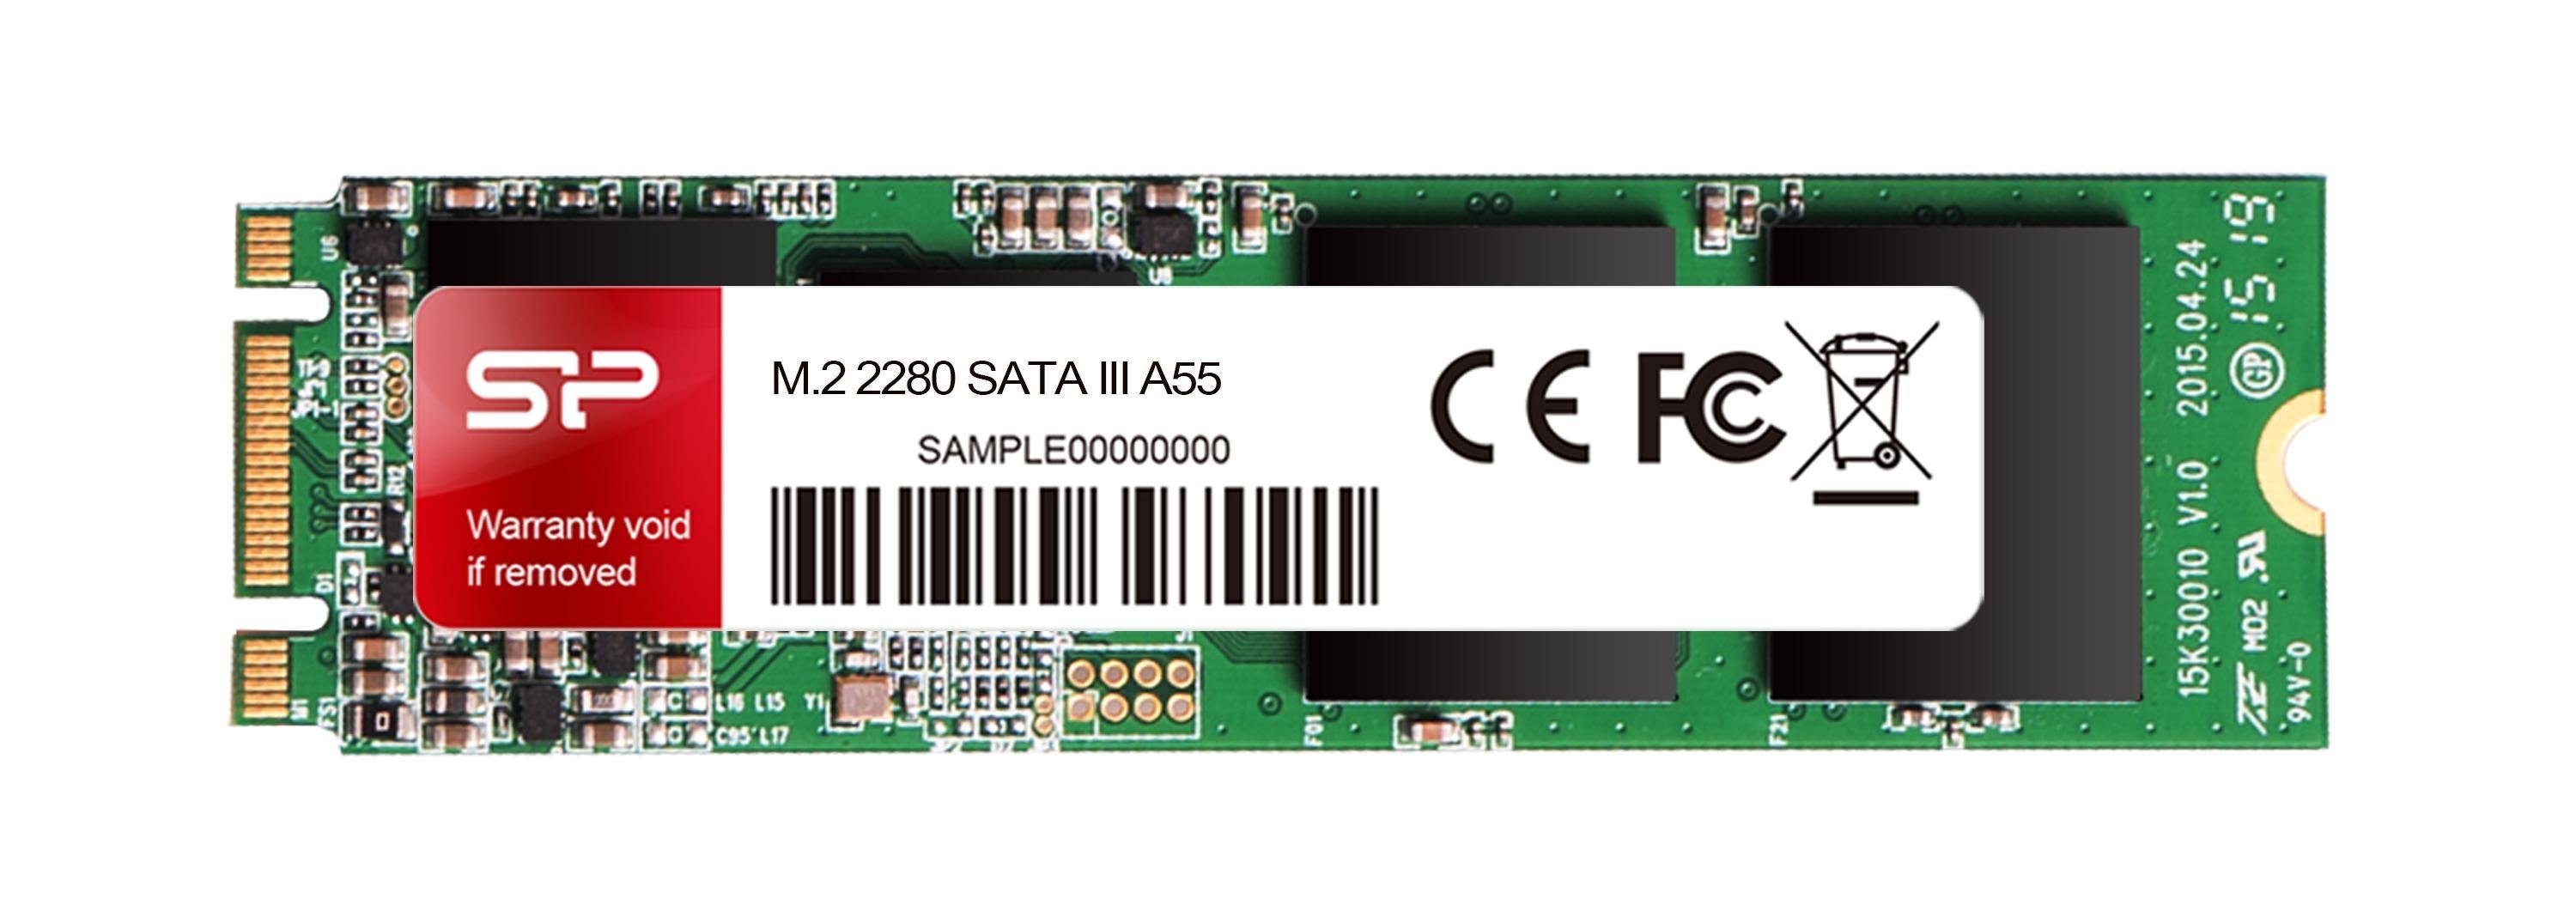 Dysk SSD Silicon Power Ace A55 256 GB M.2 SATA III 550/450 MB/s (SP256GBSS3A55M28)